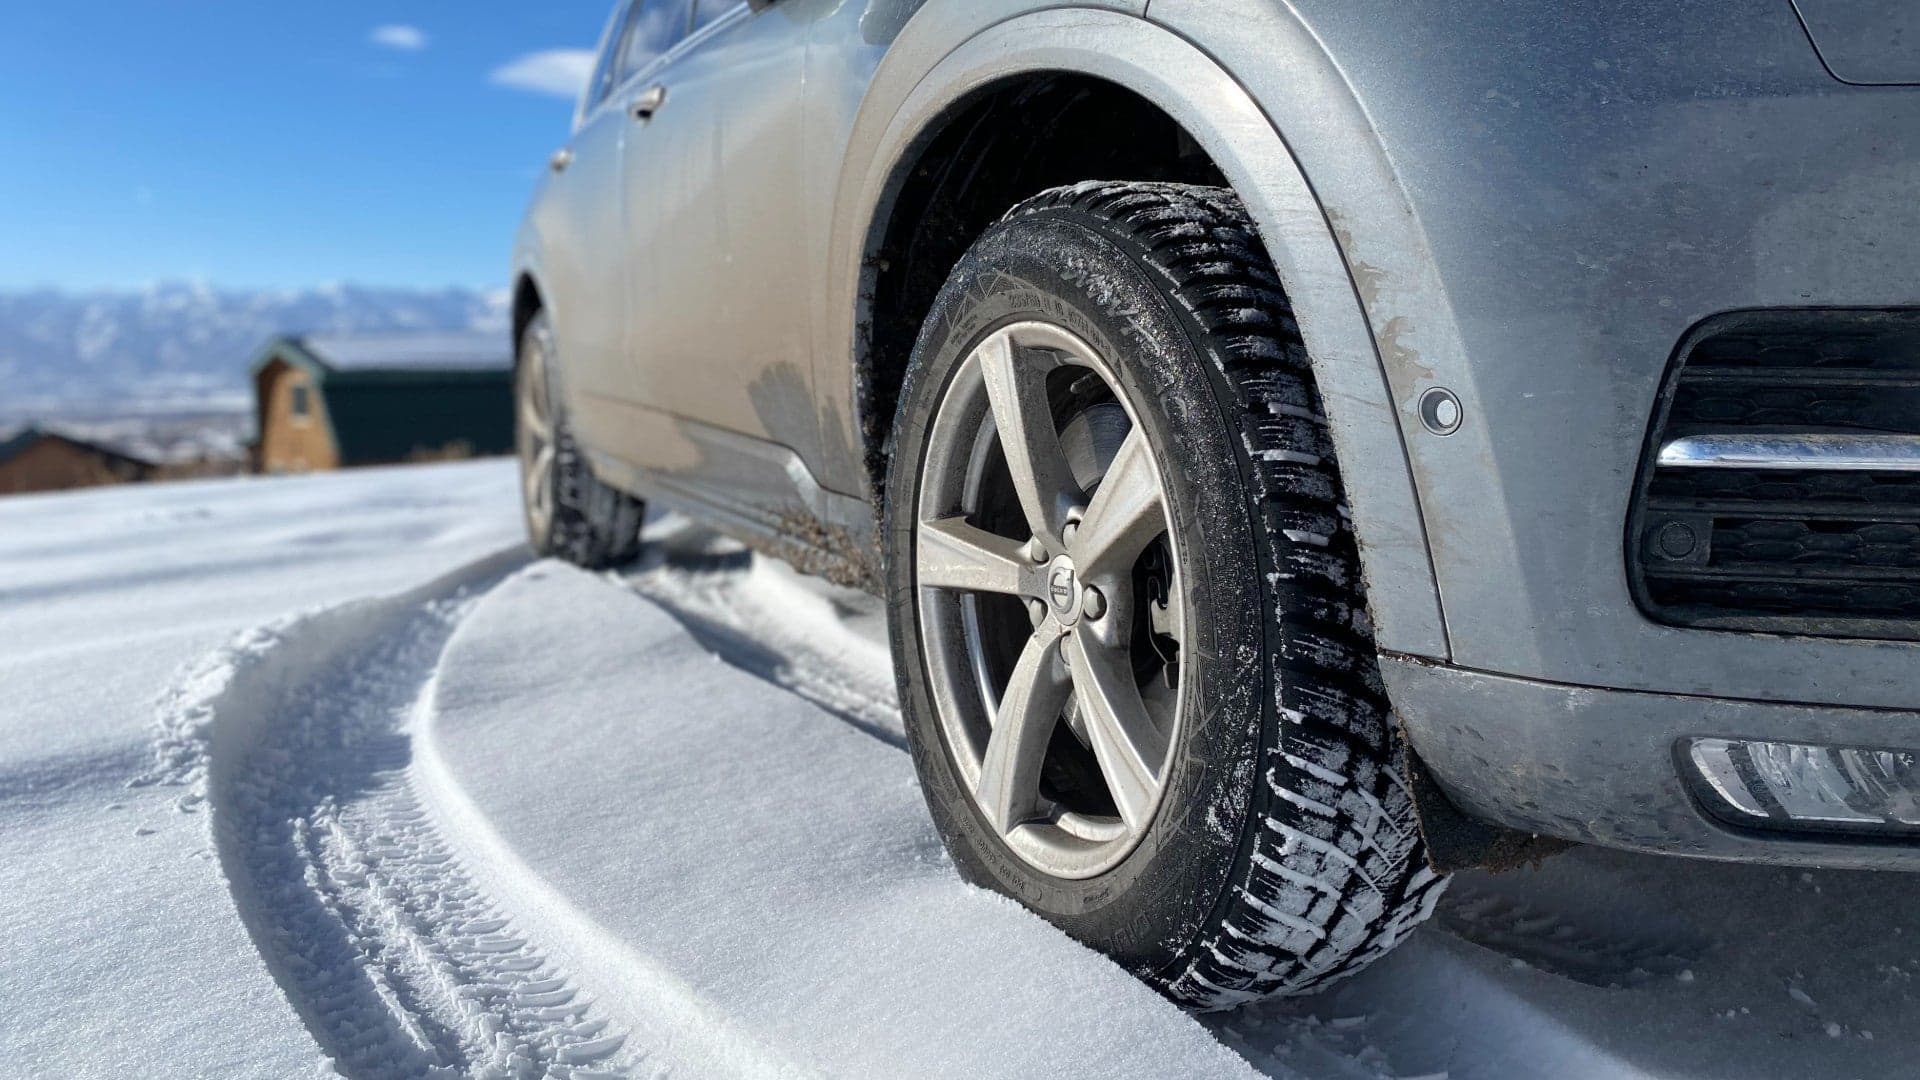 We Cross the Country and Climb Mountains Testing Vredestein’s Wintrac Pro Winter Tires